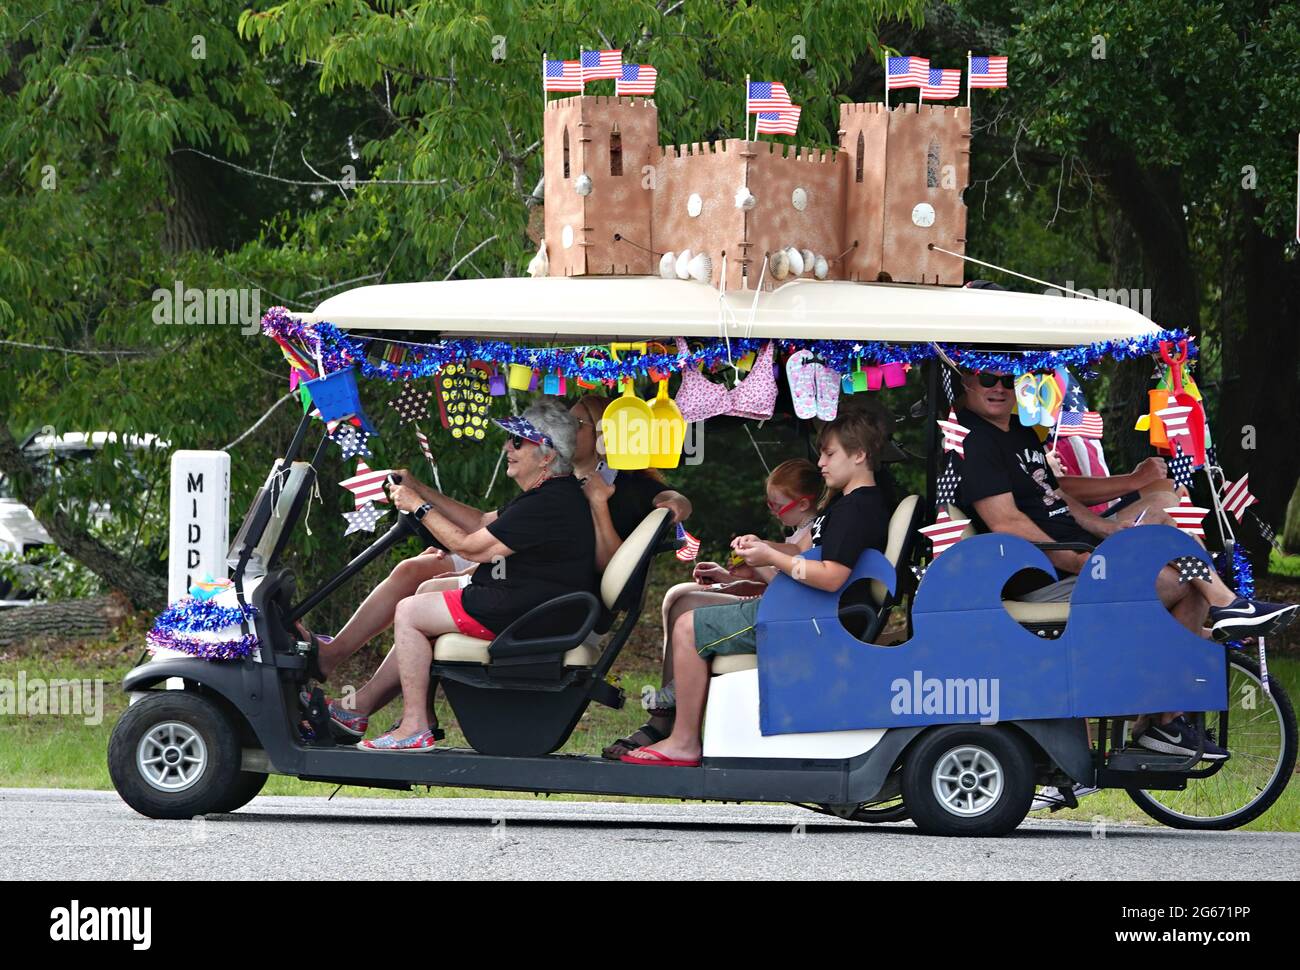 Sullivans Island, South Carolina, USA. 3rd July, 2021. A family drives their decorated golf cart during the annual Bicycle and Golf cart parade celebrating Independence Day July 3, 2021 in Sullivans Island, South Carolina. Credit: Planetpix/Alamy Live News Stock Photo